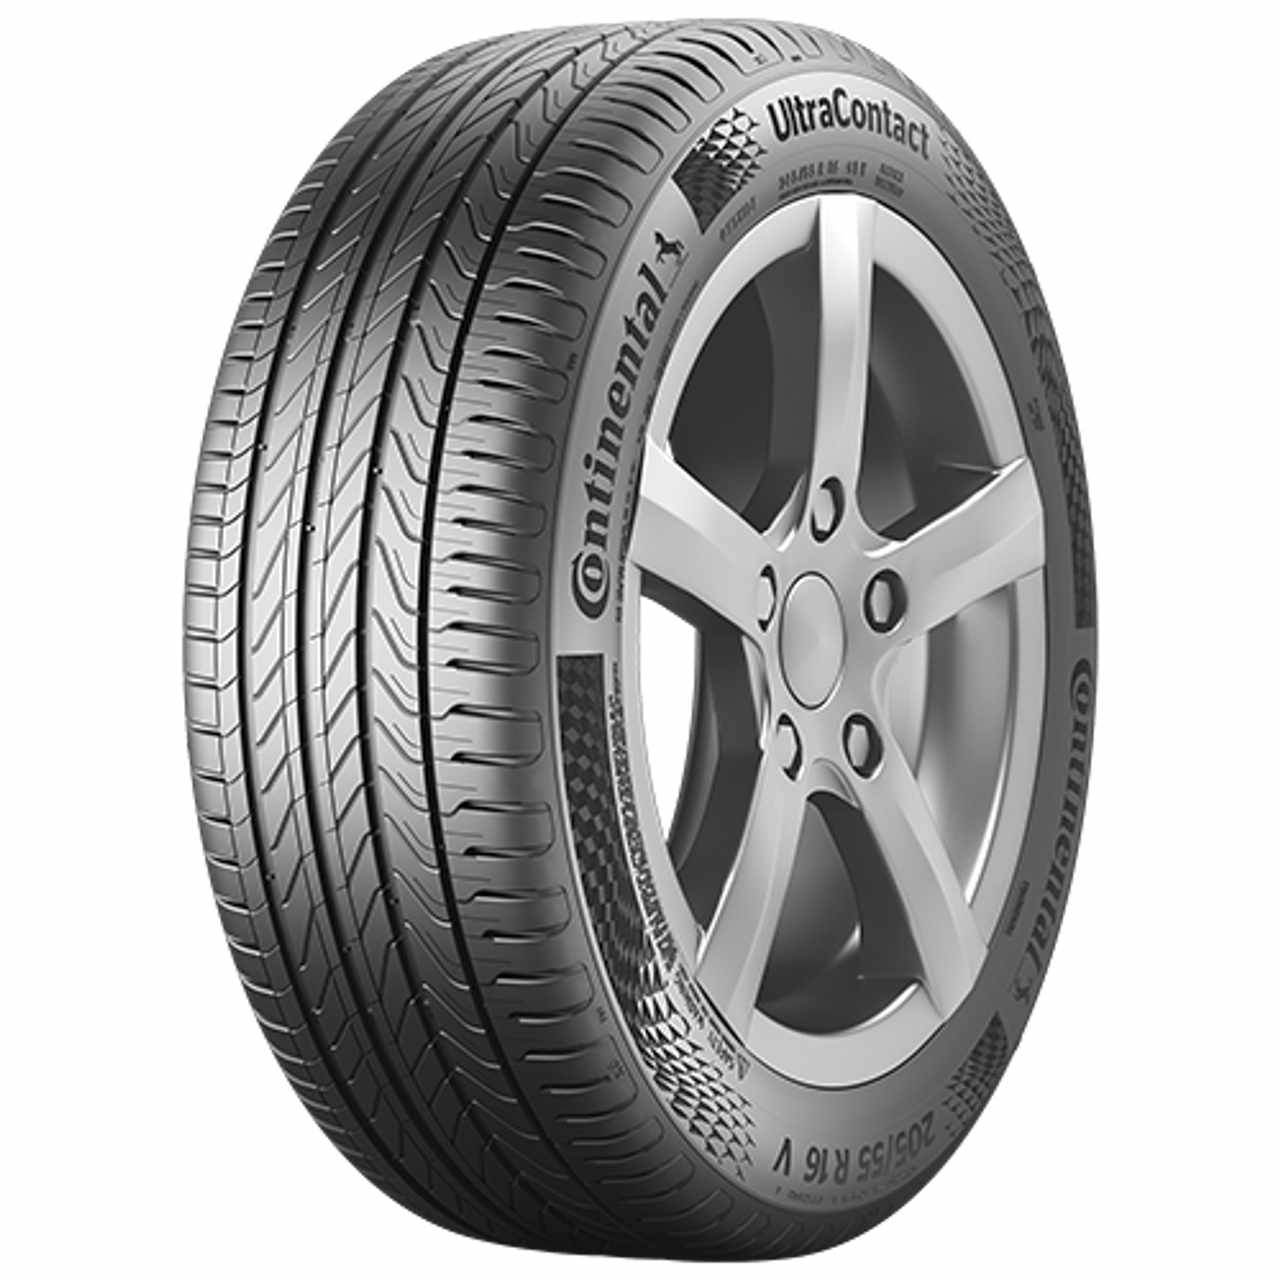 CONTINENTAL ULTRACONTACT (EVc) 185/65R15 88H BSW